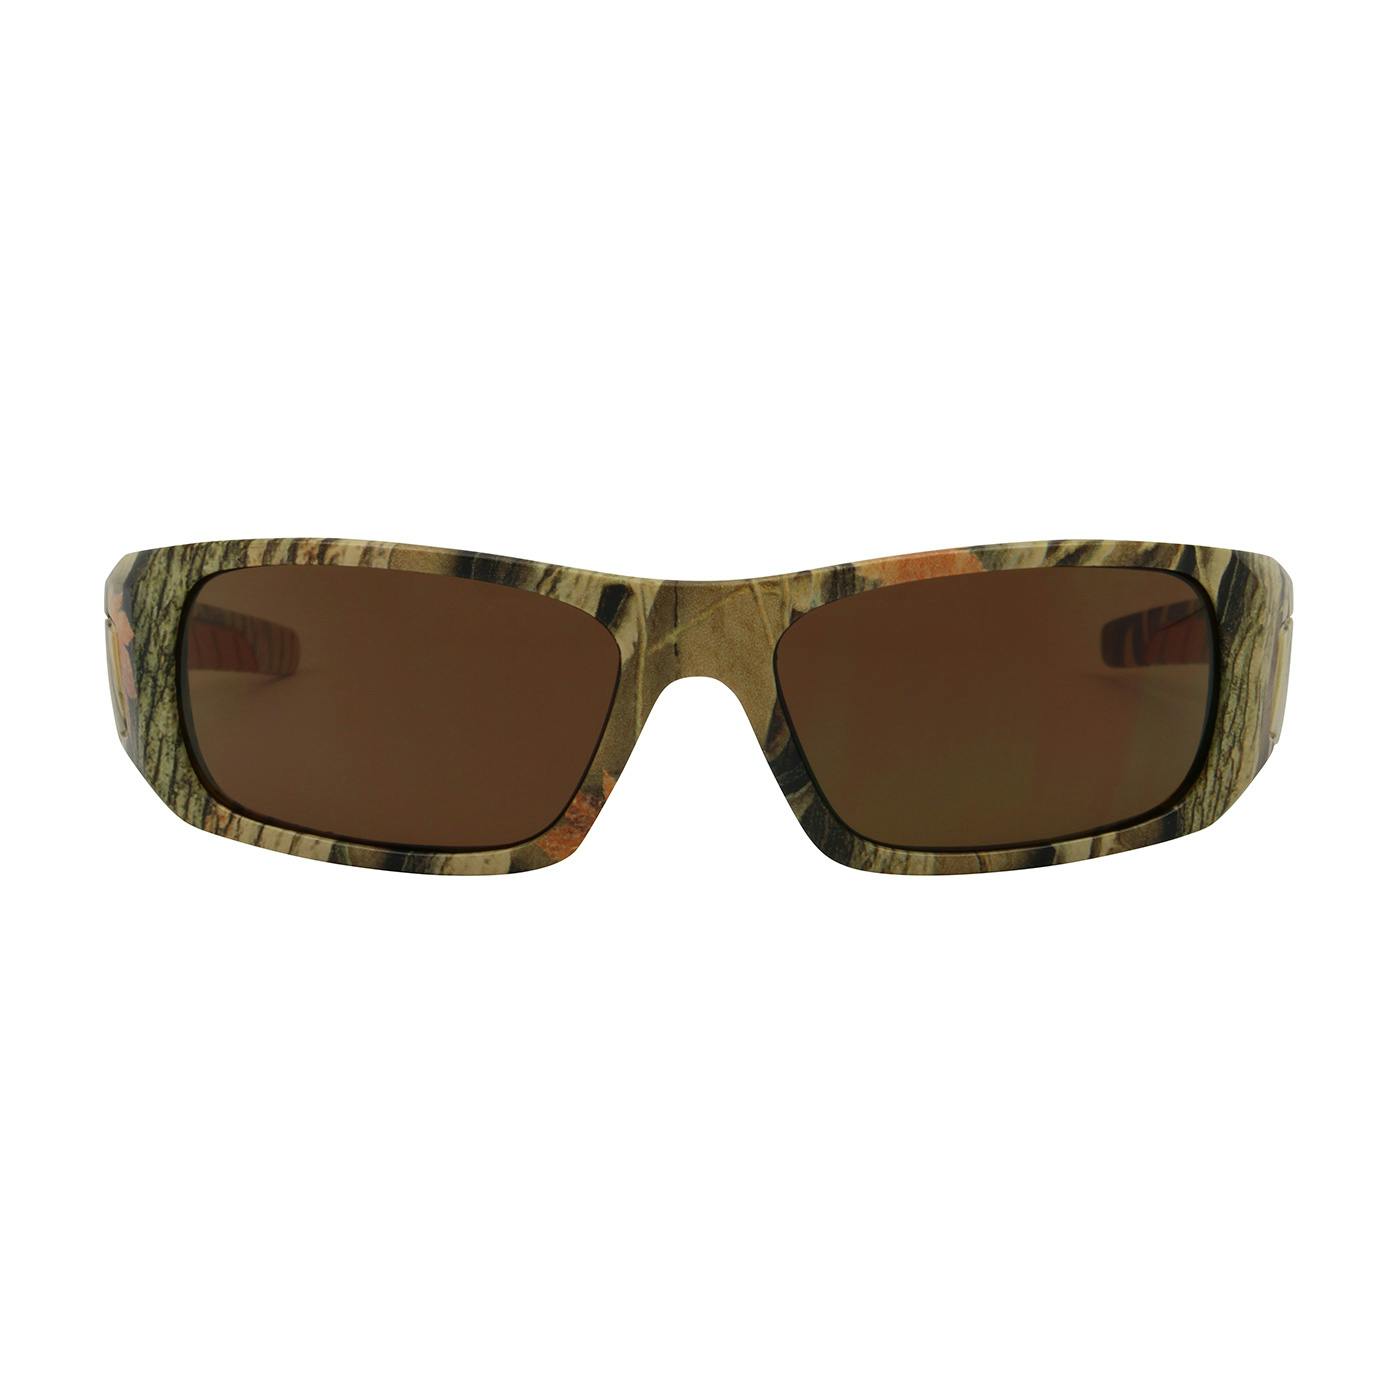 Full Frame Safety Glasses with Camouflage Frame, Brown Lens and Anti-Scratch / Anti-Fog Coating, Camouflage (250-53-1024) - OS_1